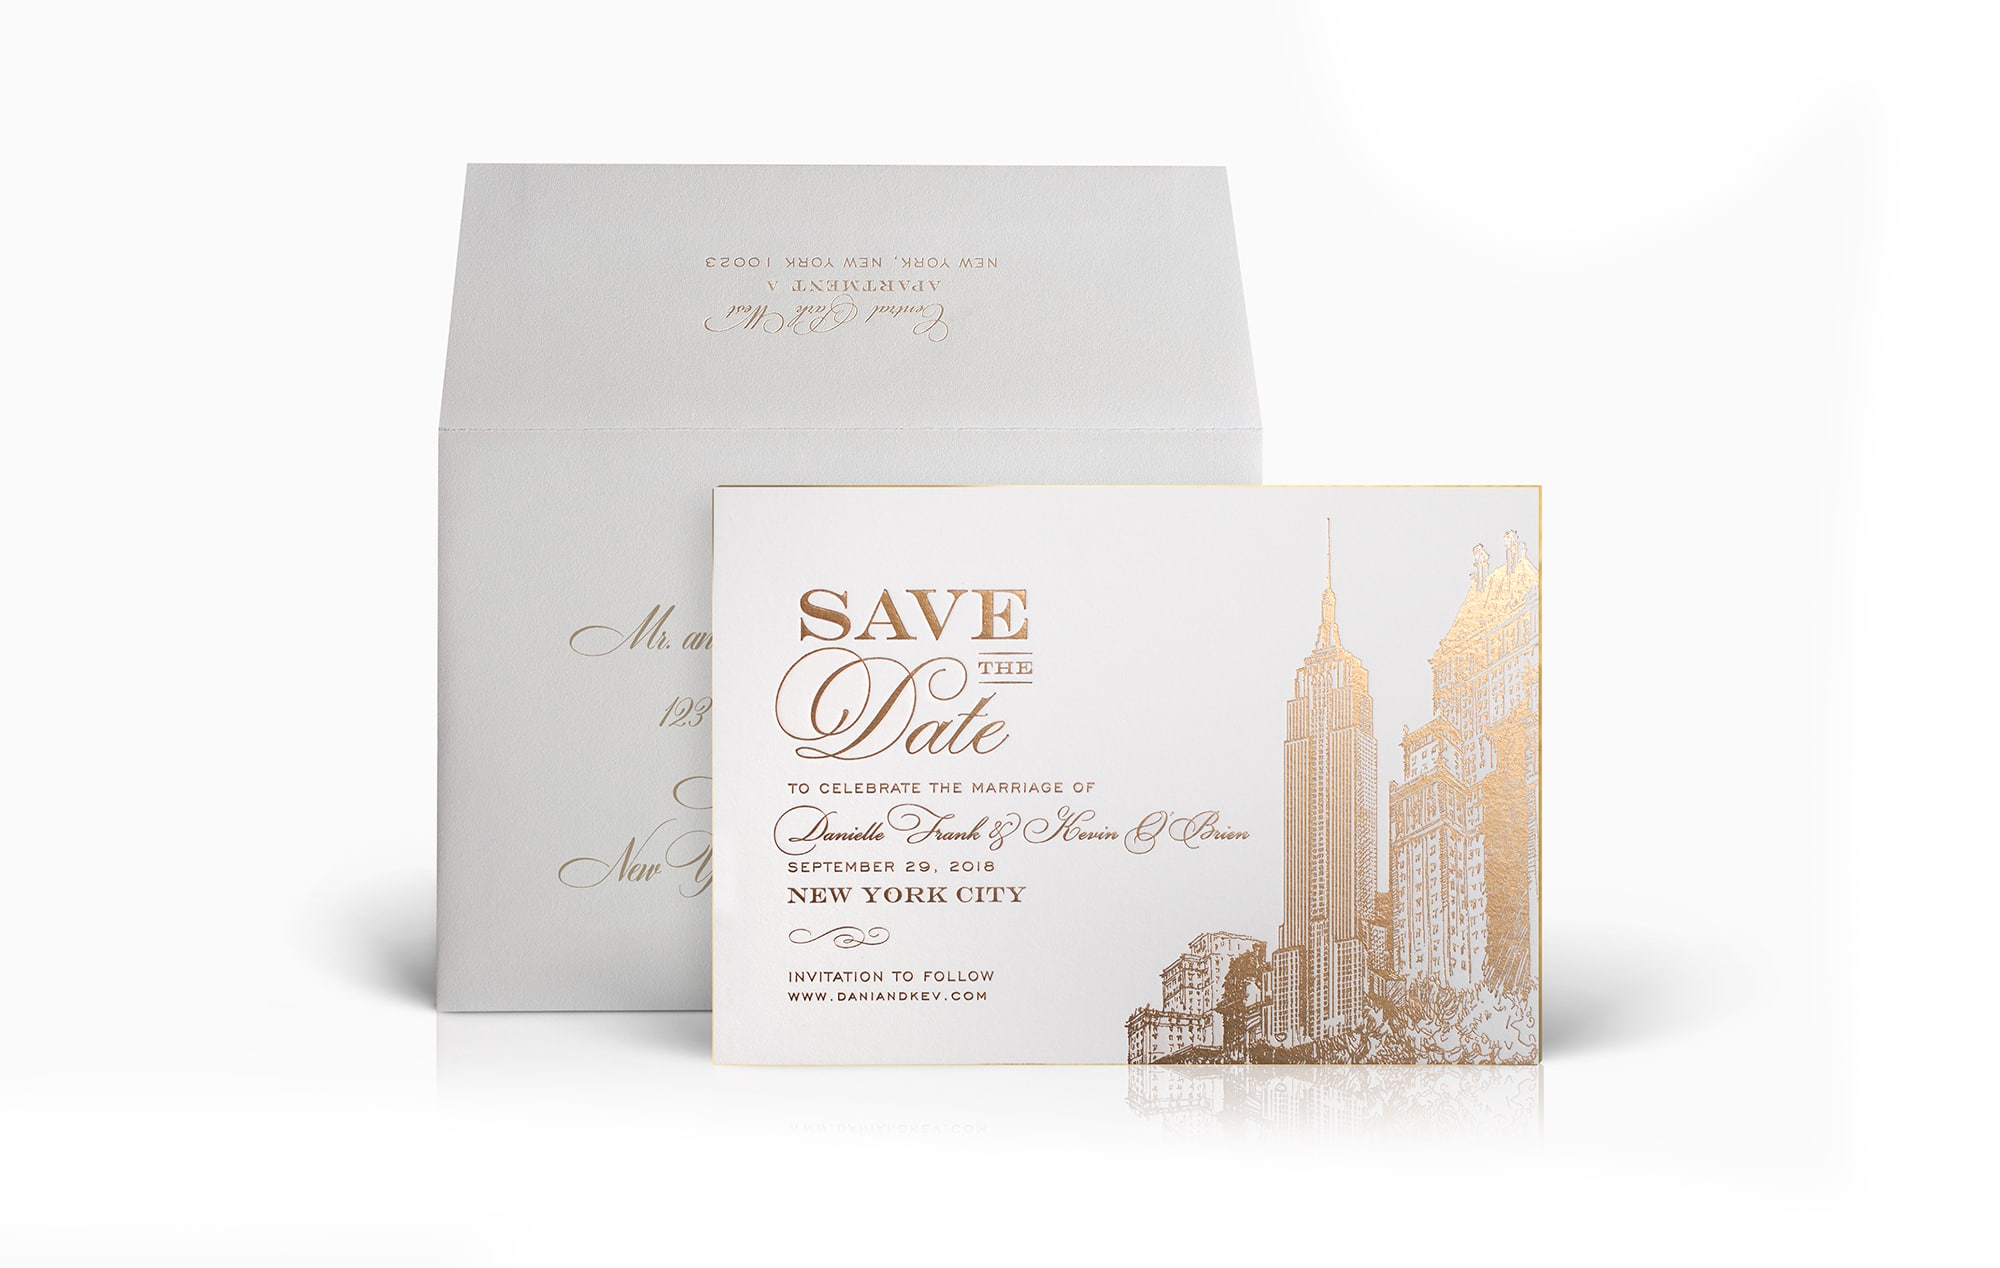 Save the Date with the skyline of New York